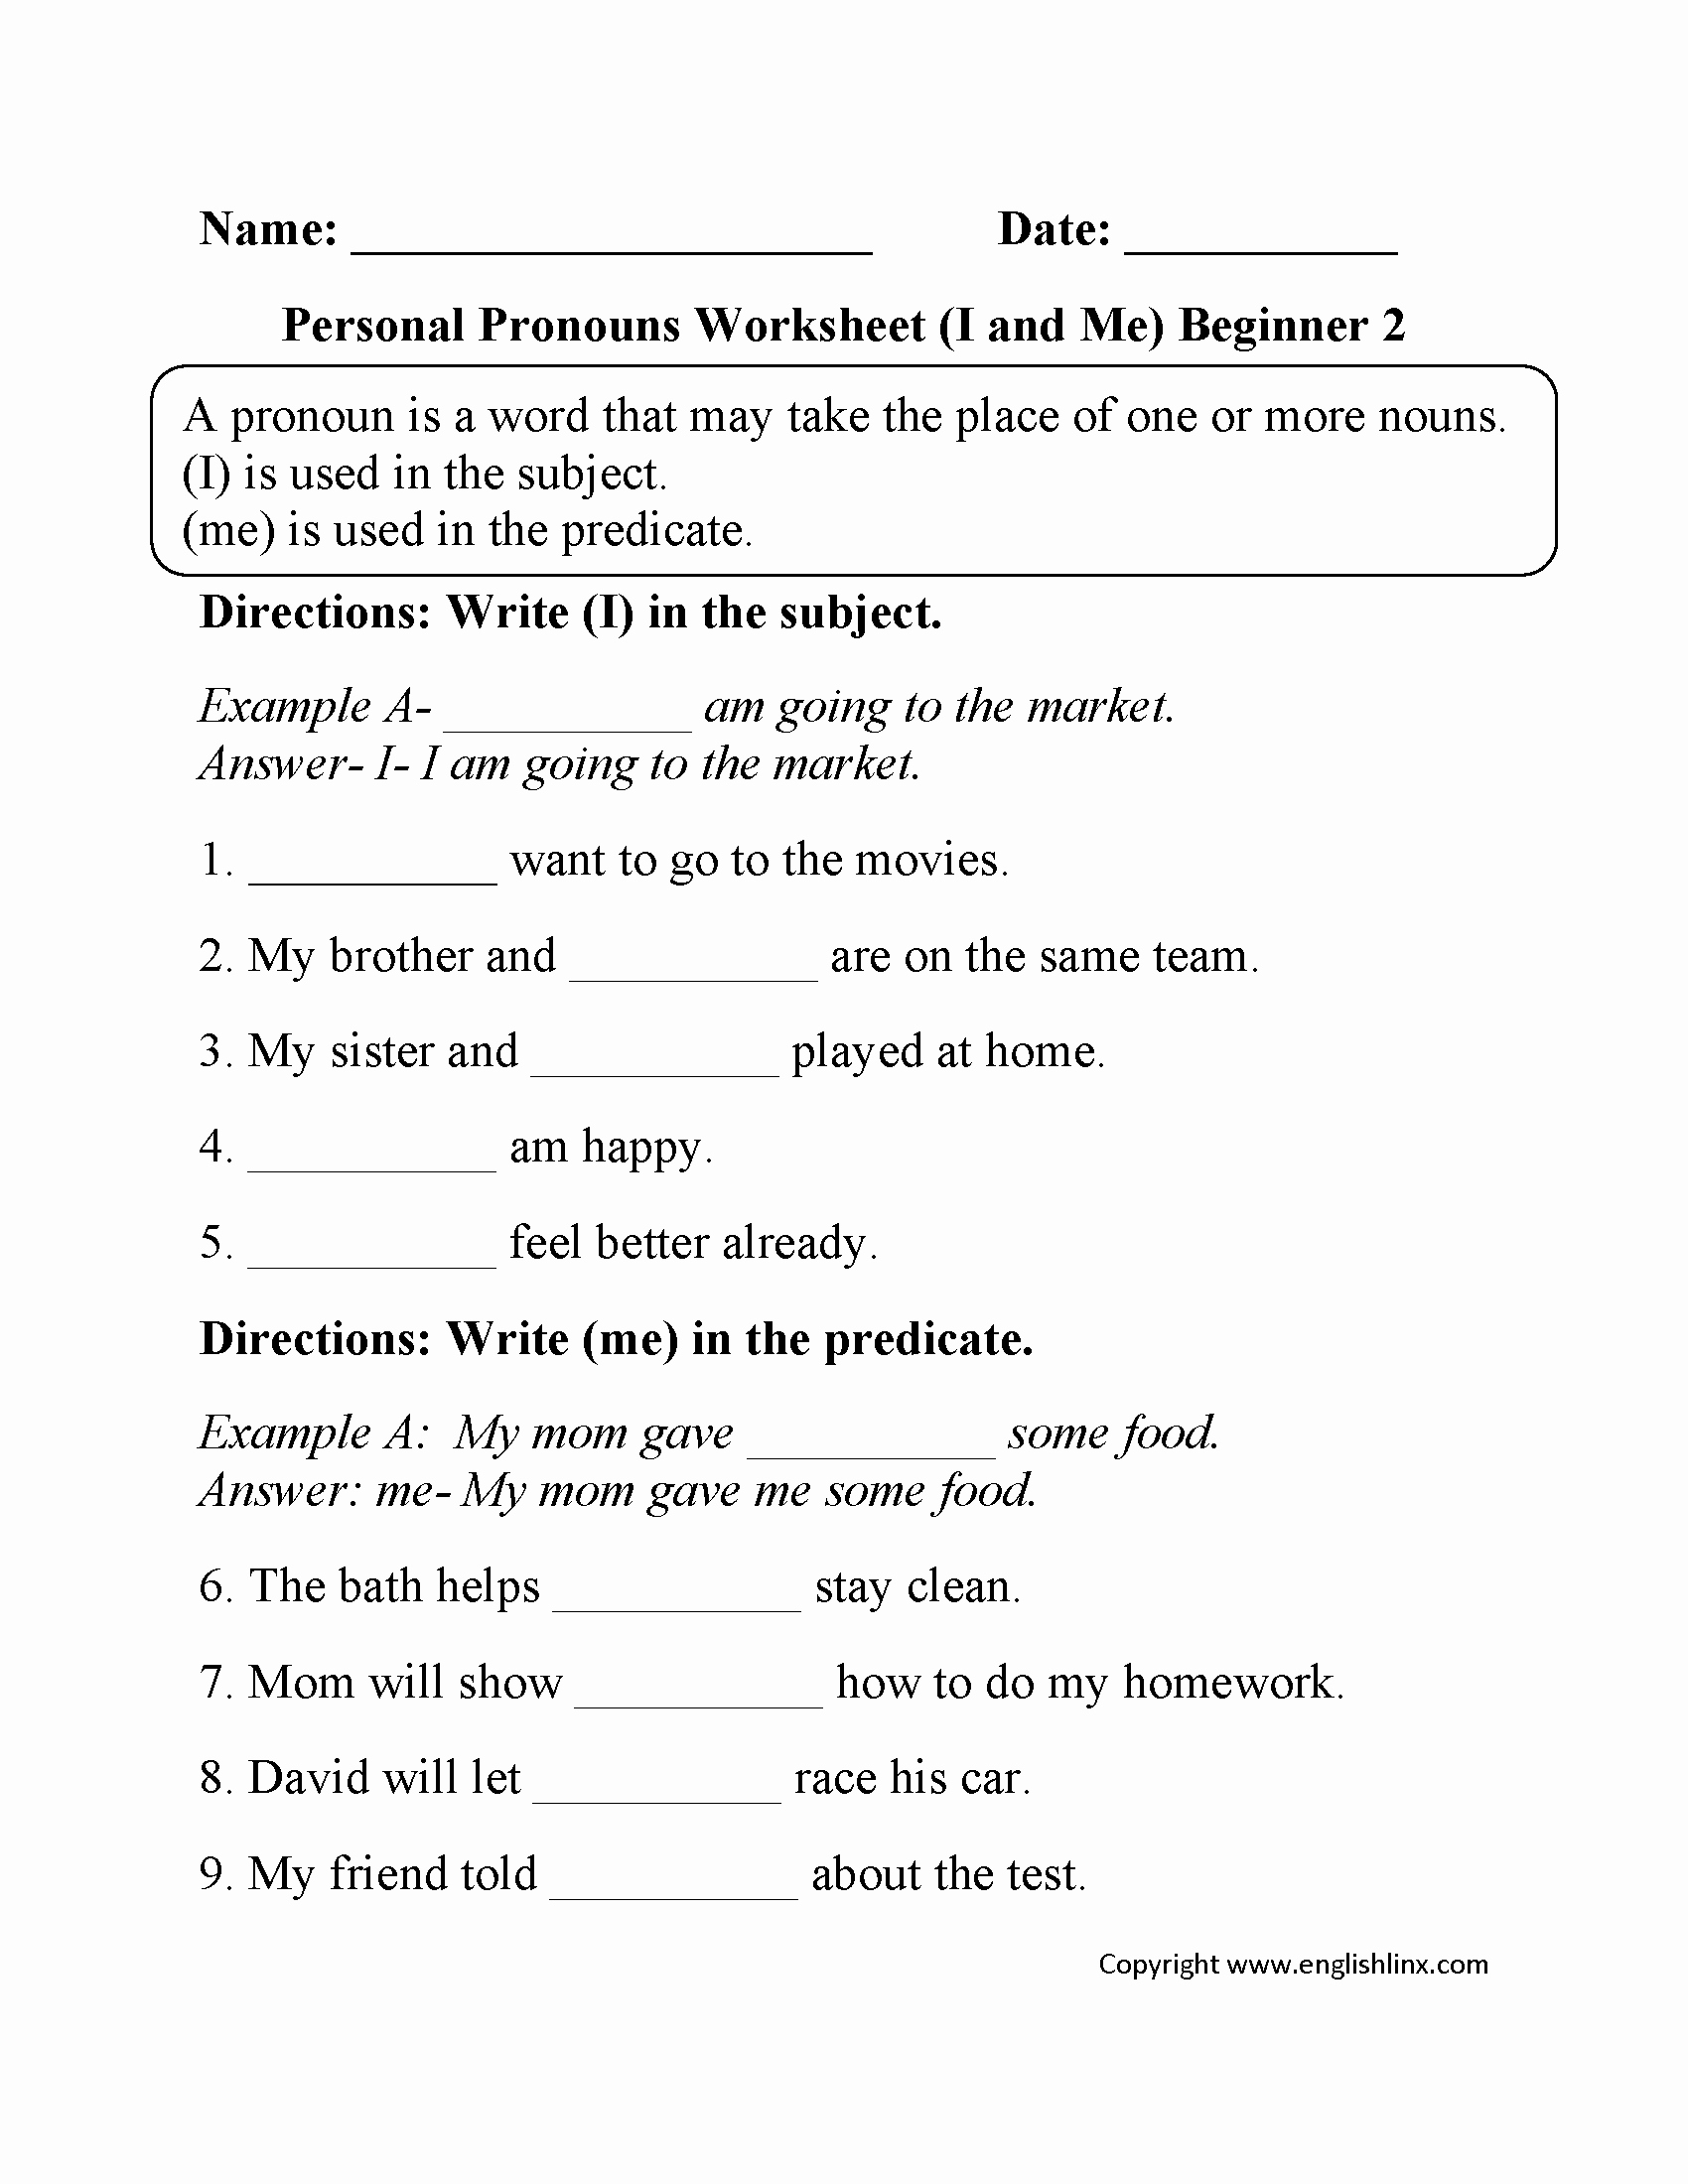 Free Pronoun Worksheets Best Of Subject and Object Pronouns Worksheet